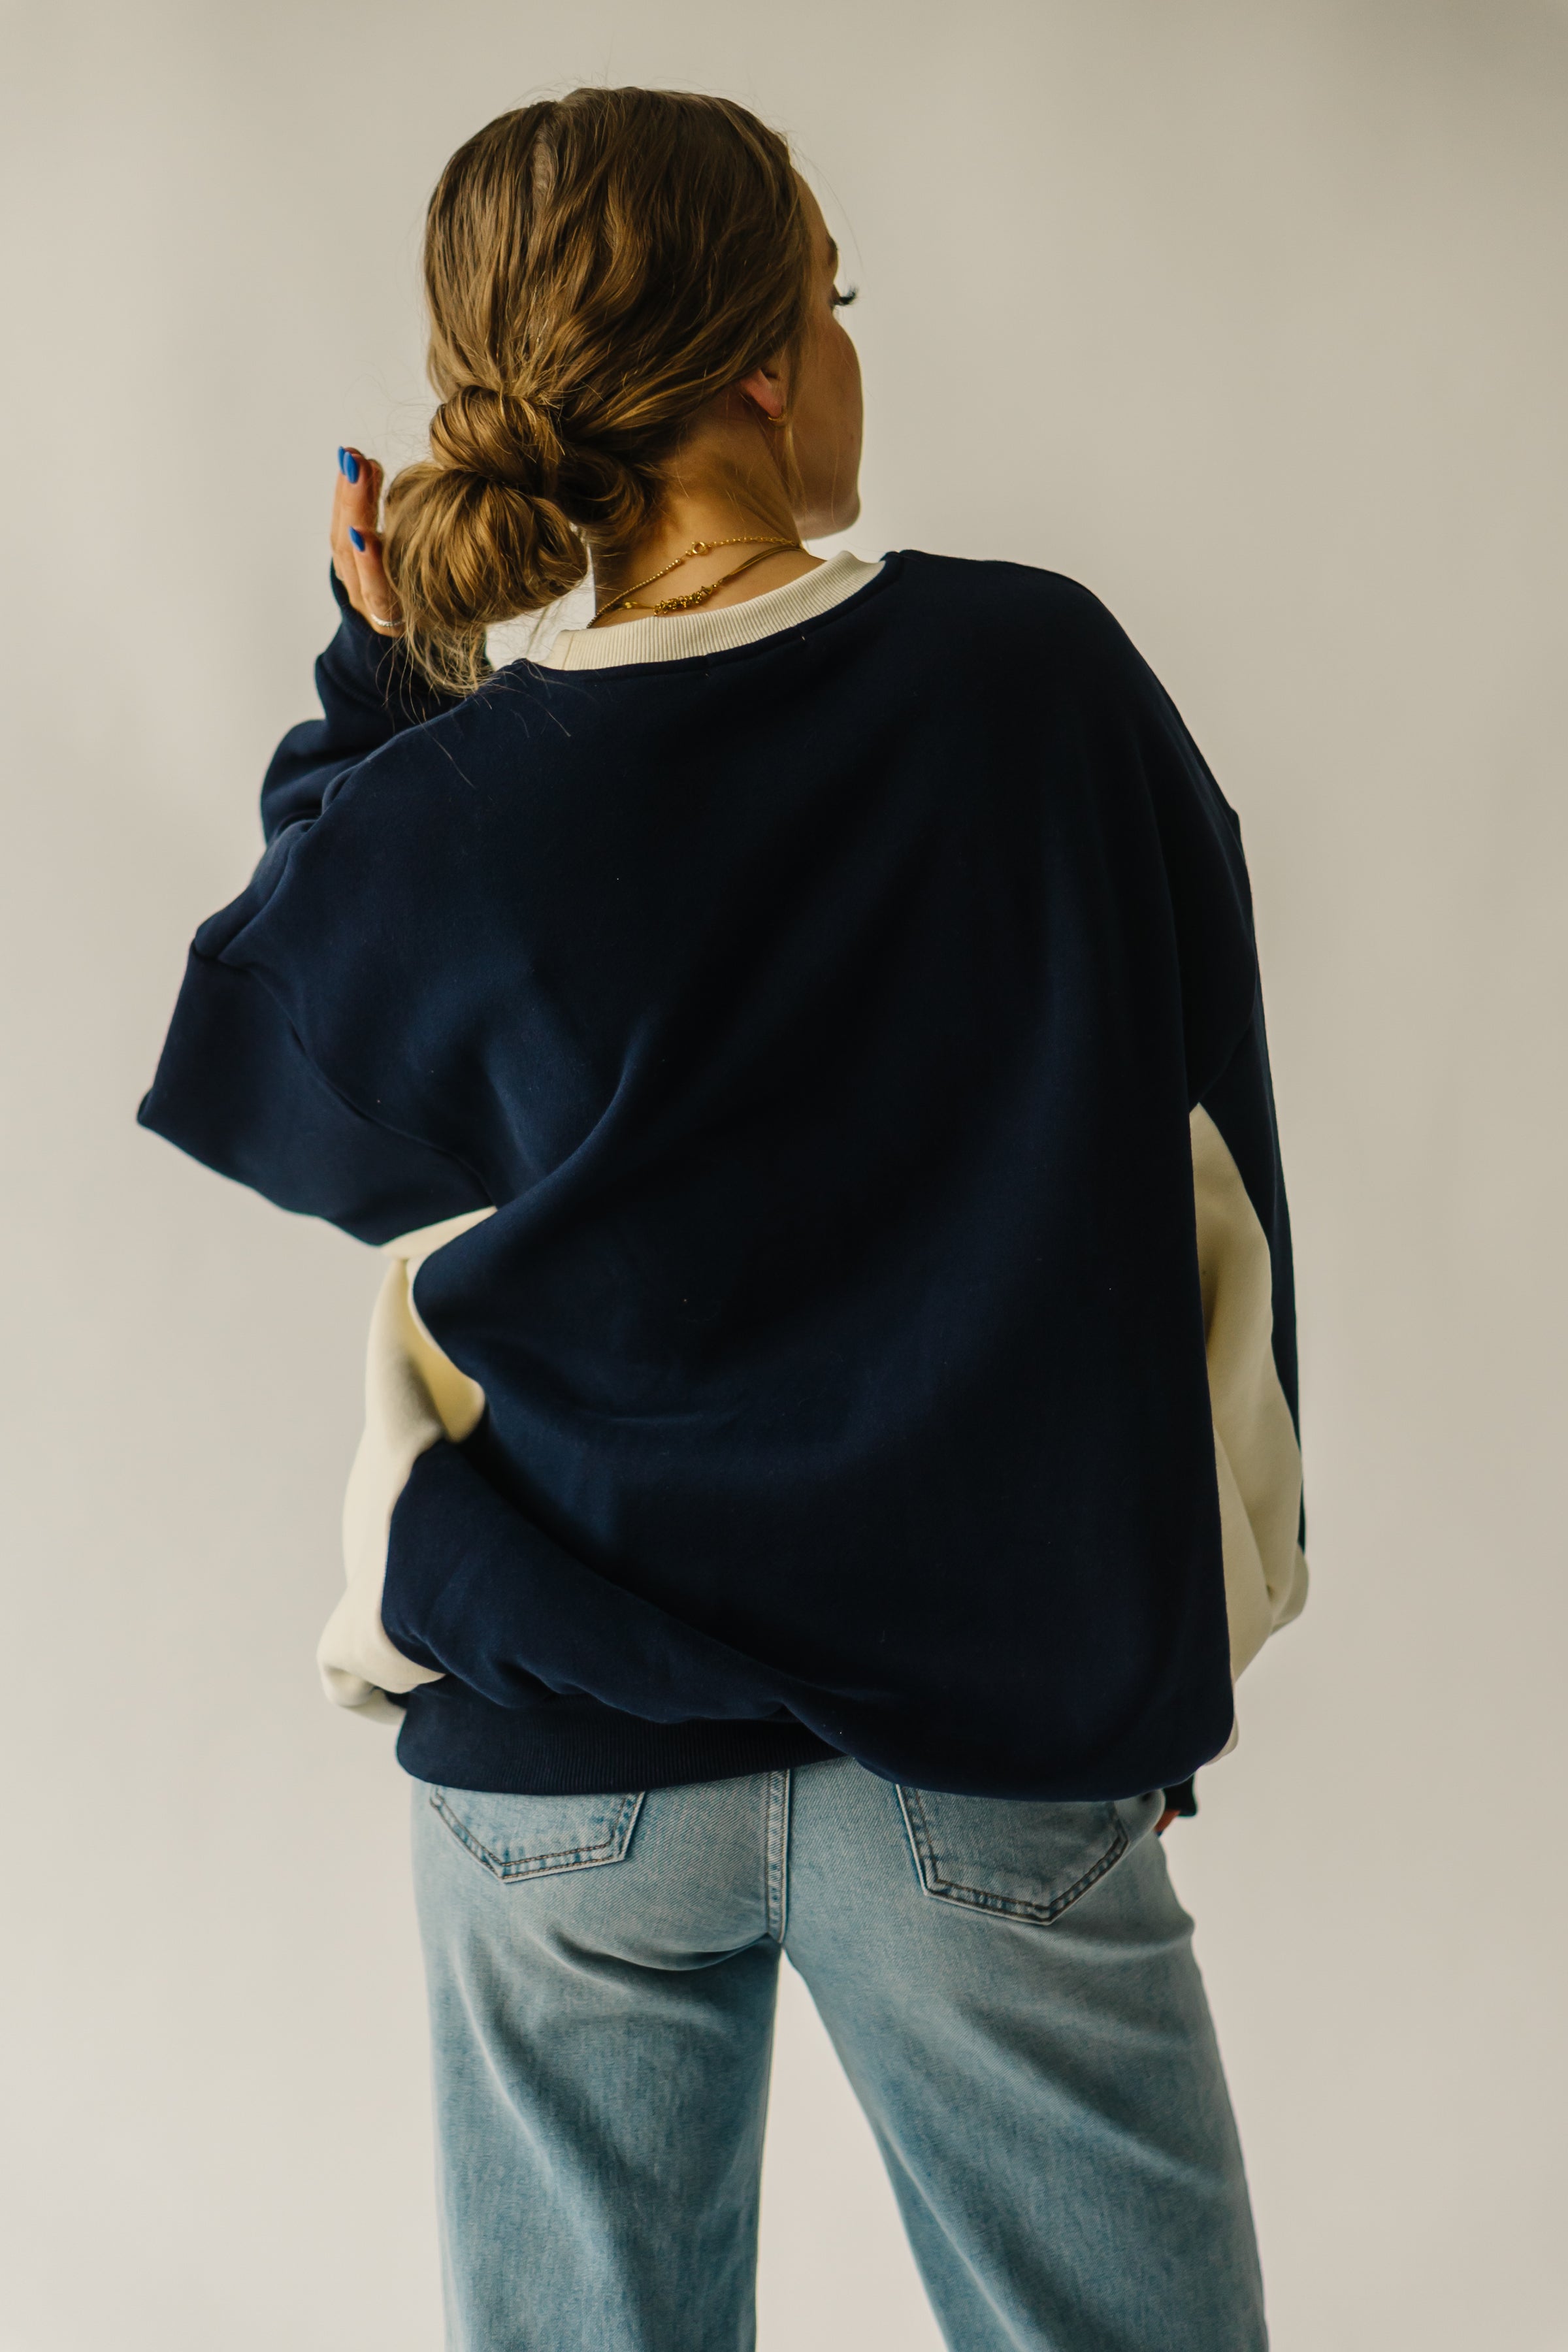 The Sports Club Graphic in Pullover – & Piper + Cream Scoot Navy